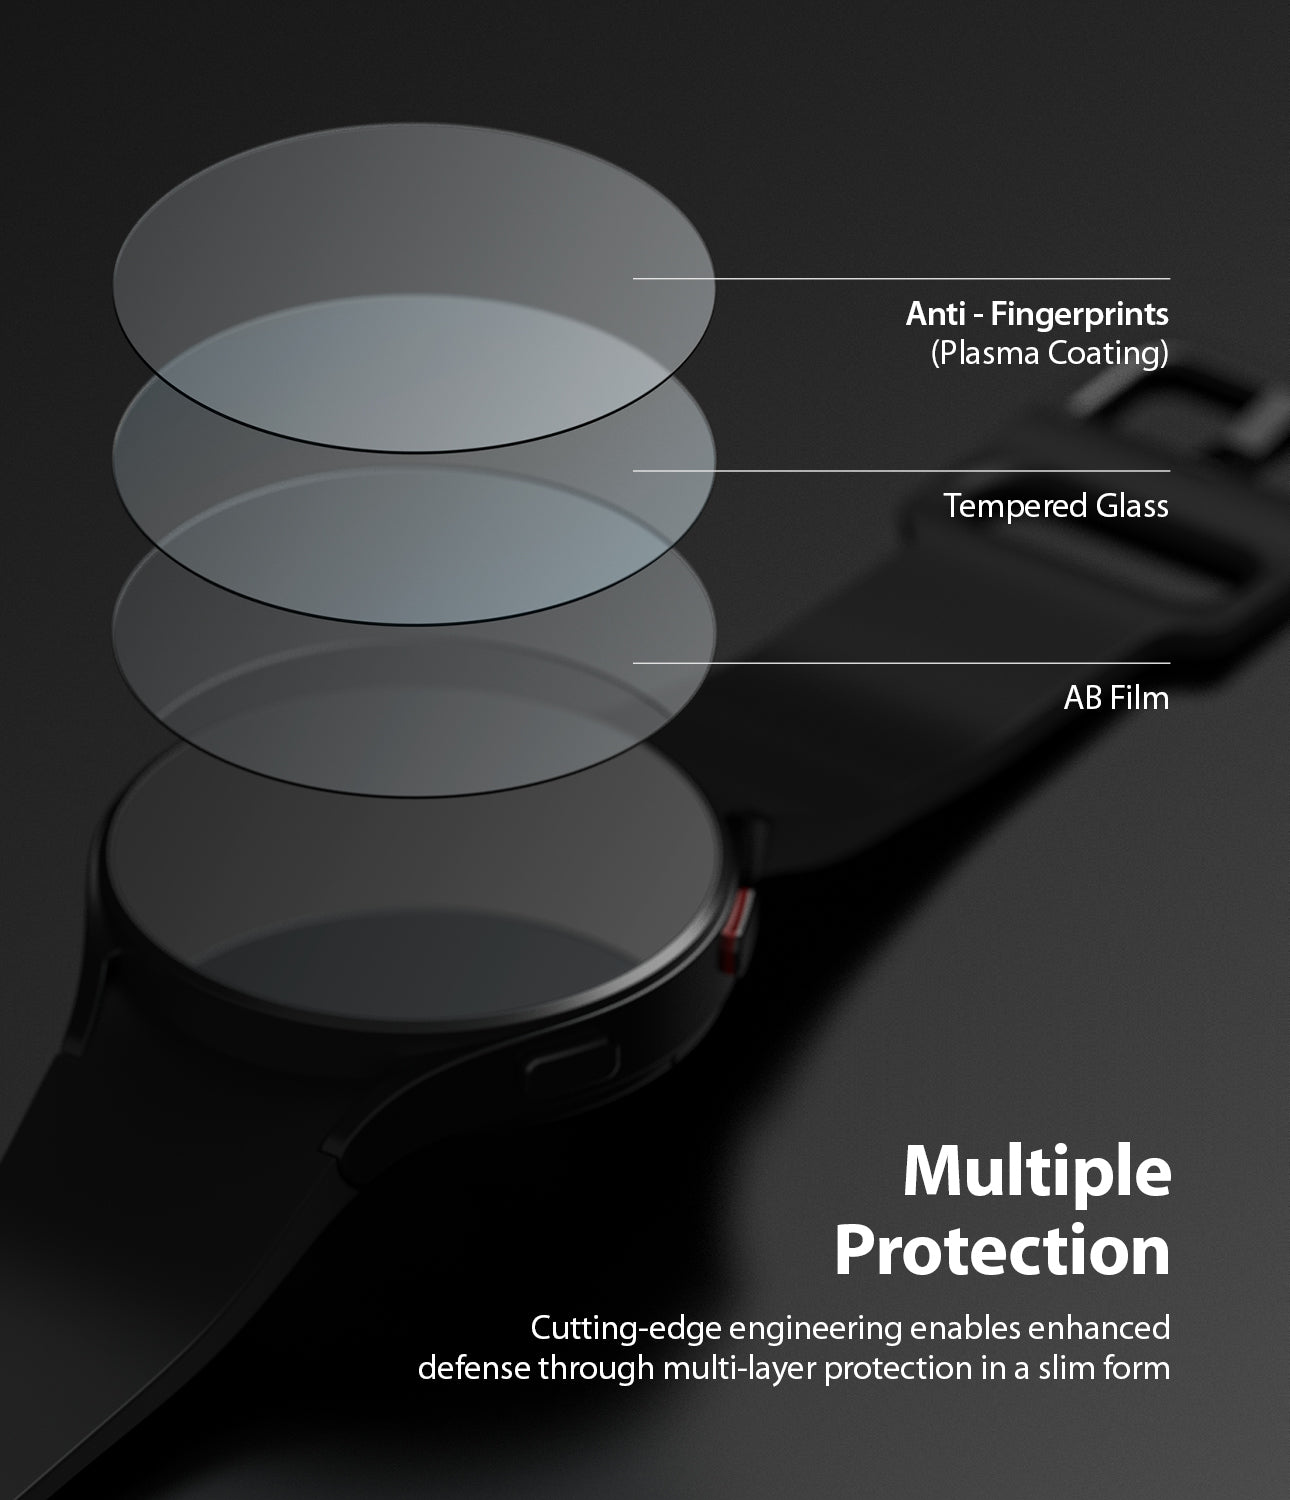 Multi-layer protection